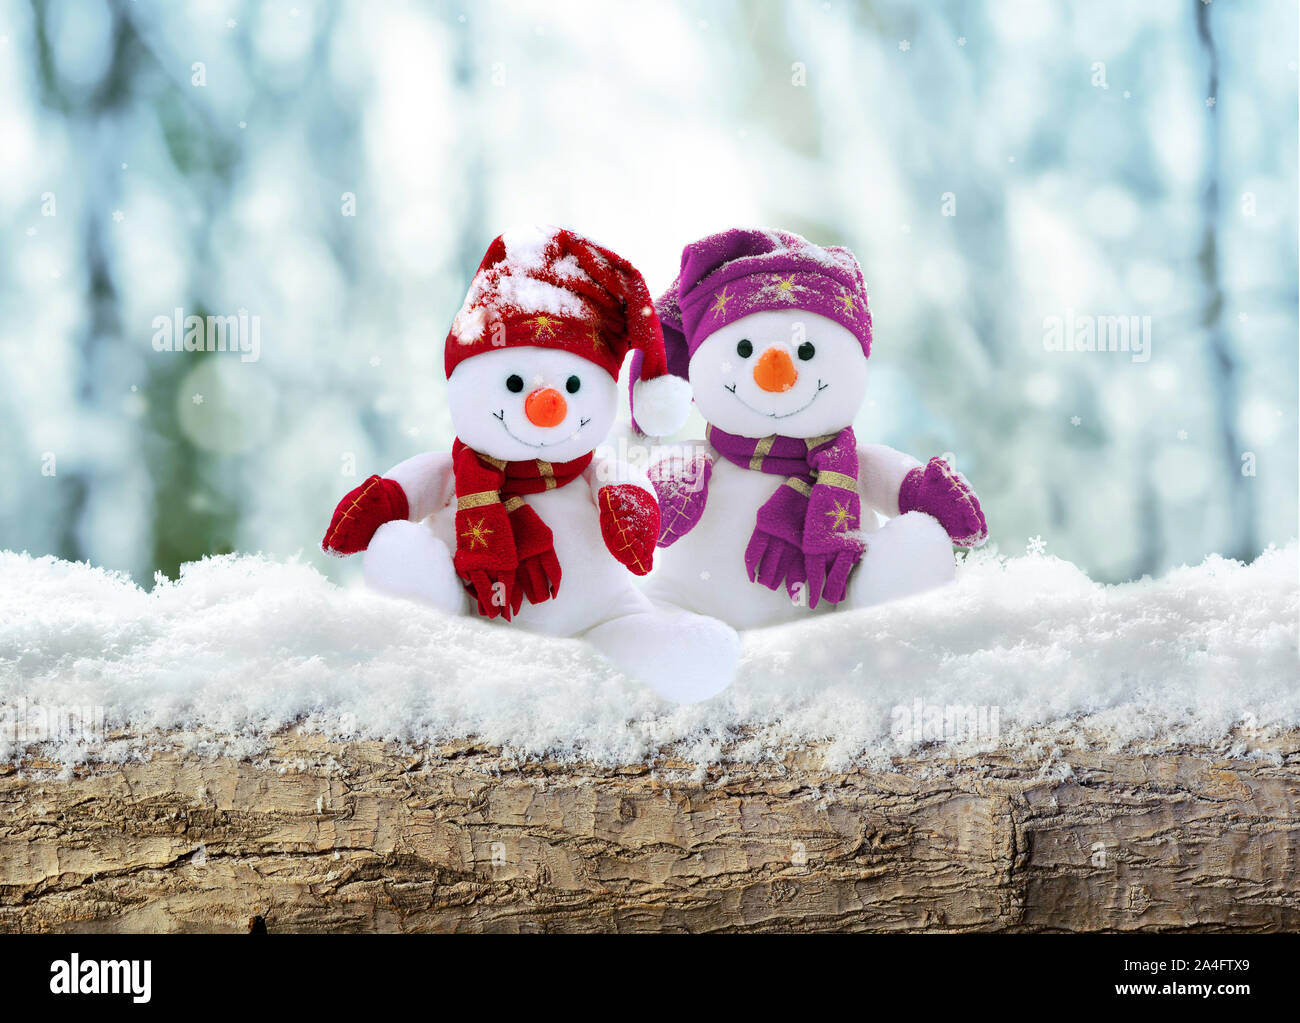 Merry christmas and happy new year greeting card .Two cheerful snowman standing in winter landscape in snow. Stock Photo